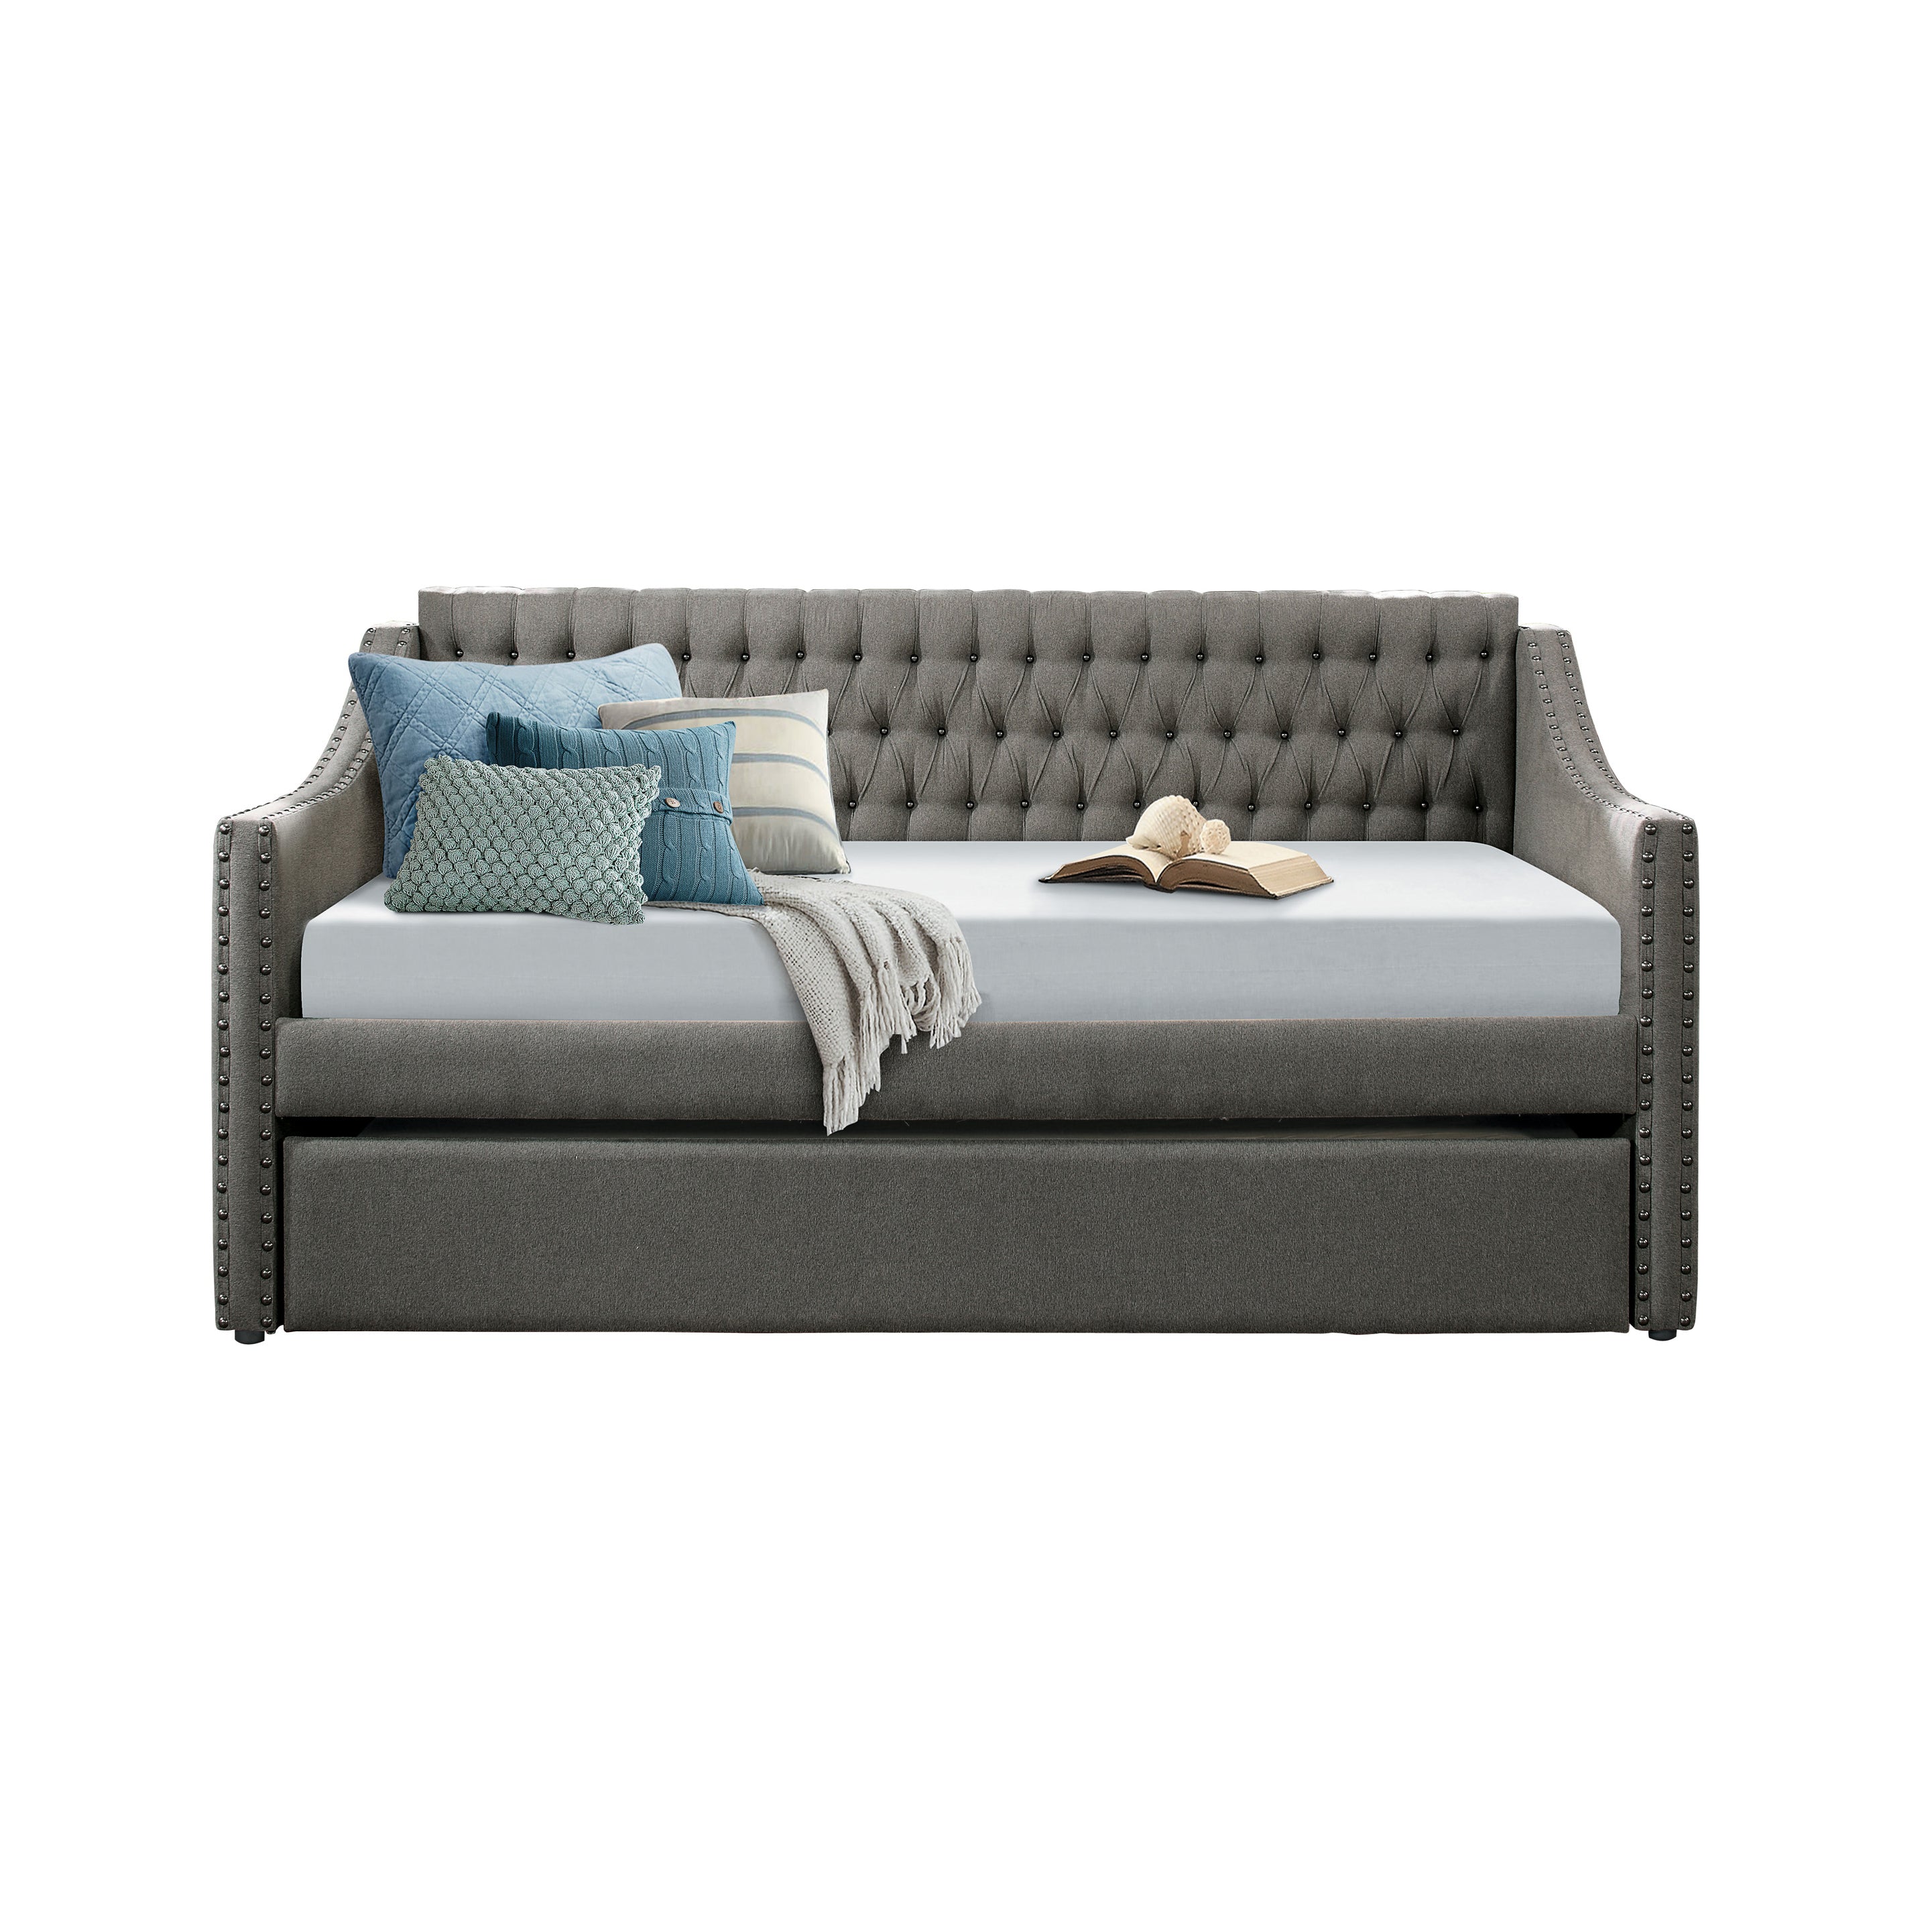 NOBLEMOOD Upholstered Sofa Daybed with Trundle Button-Tufted Nailhead Trim, Dark Gray